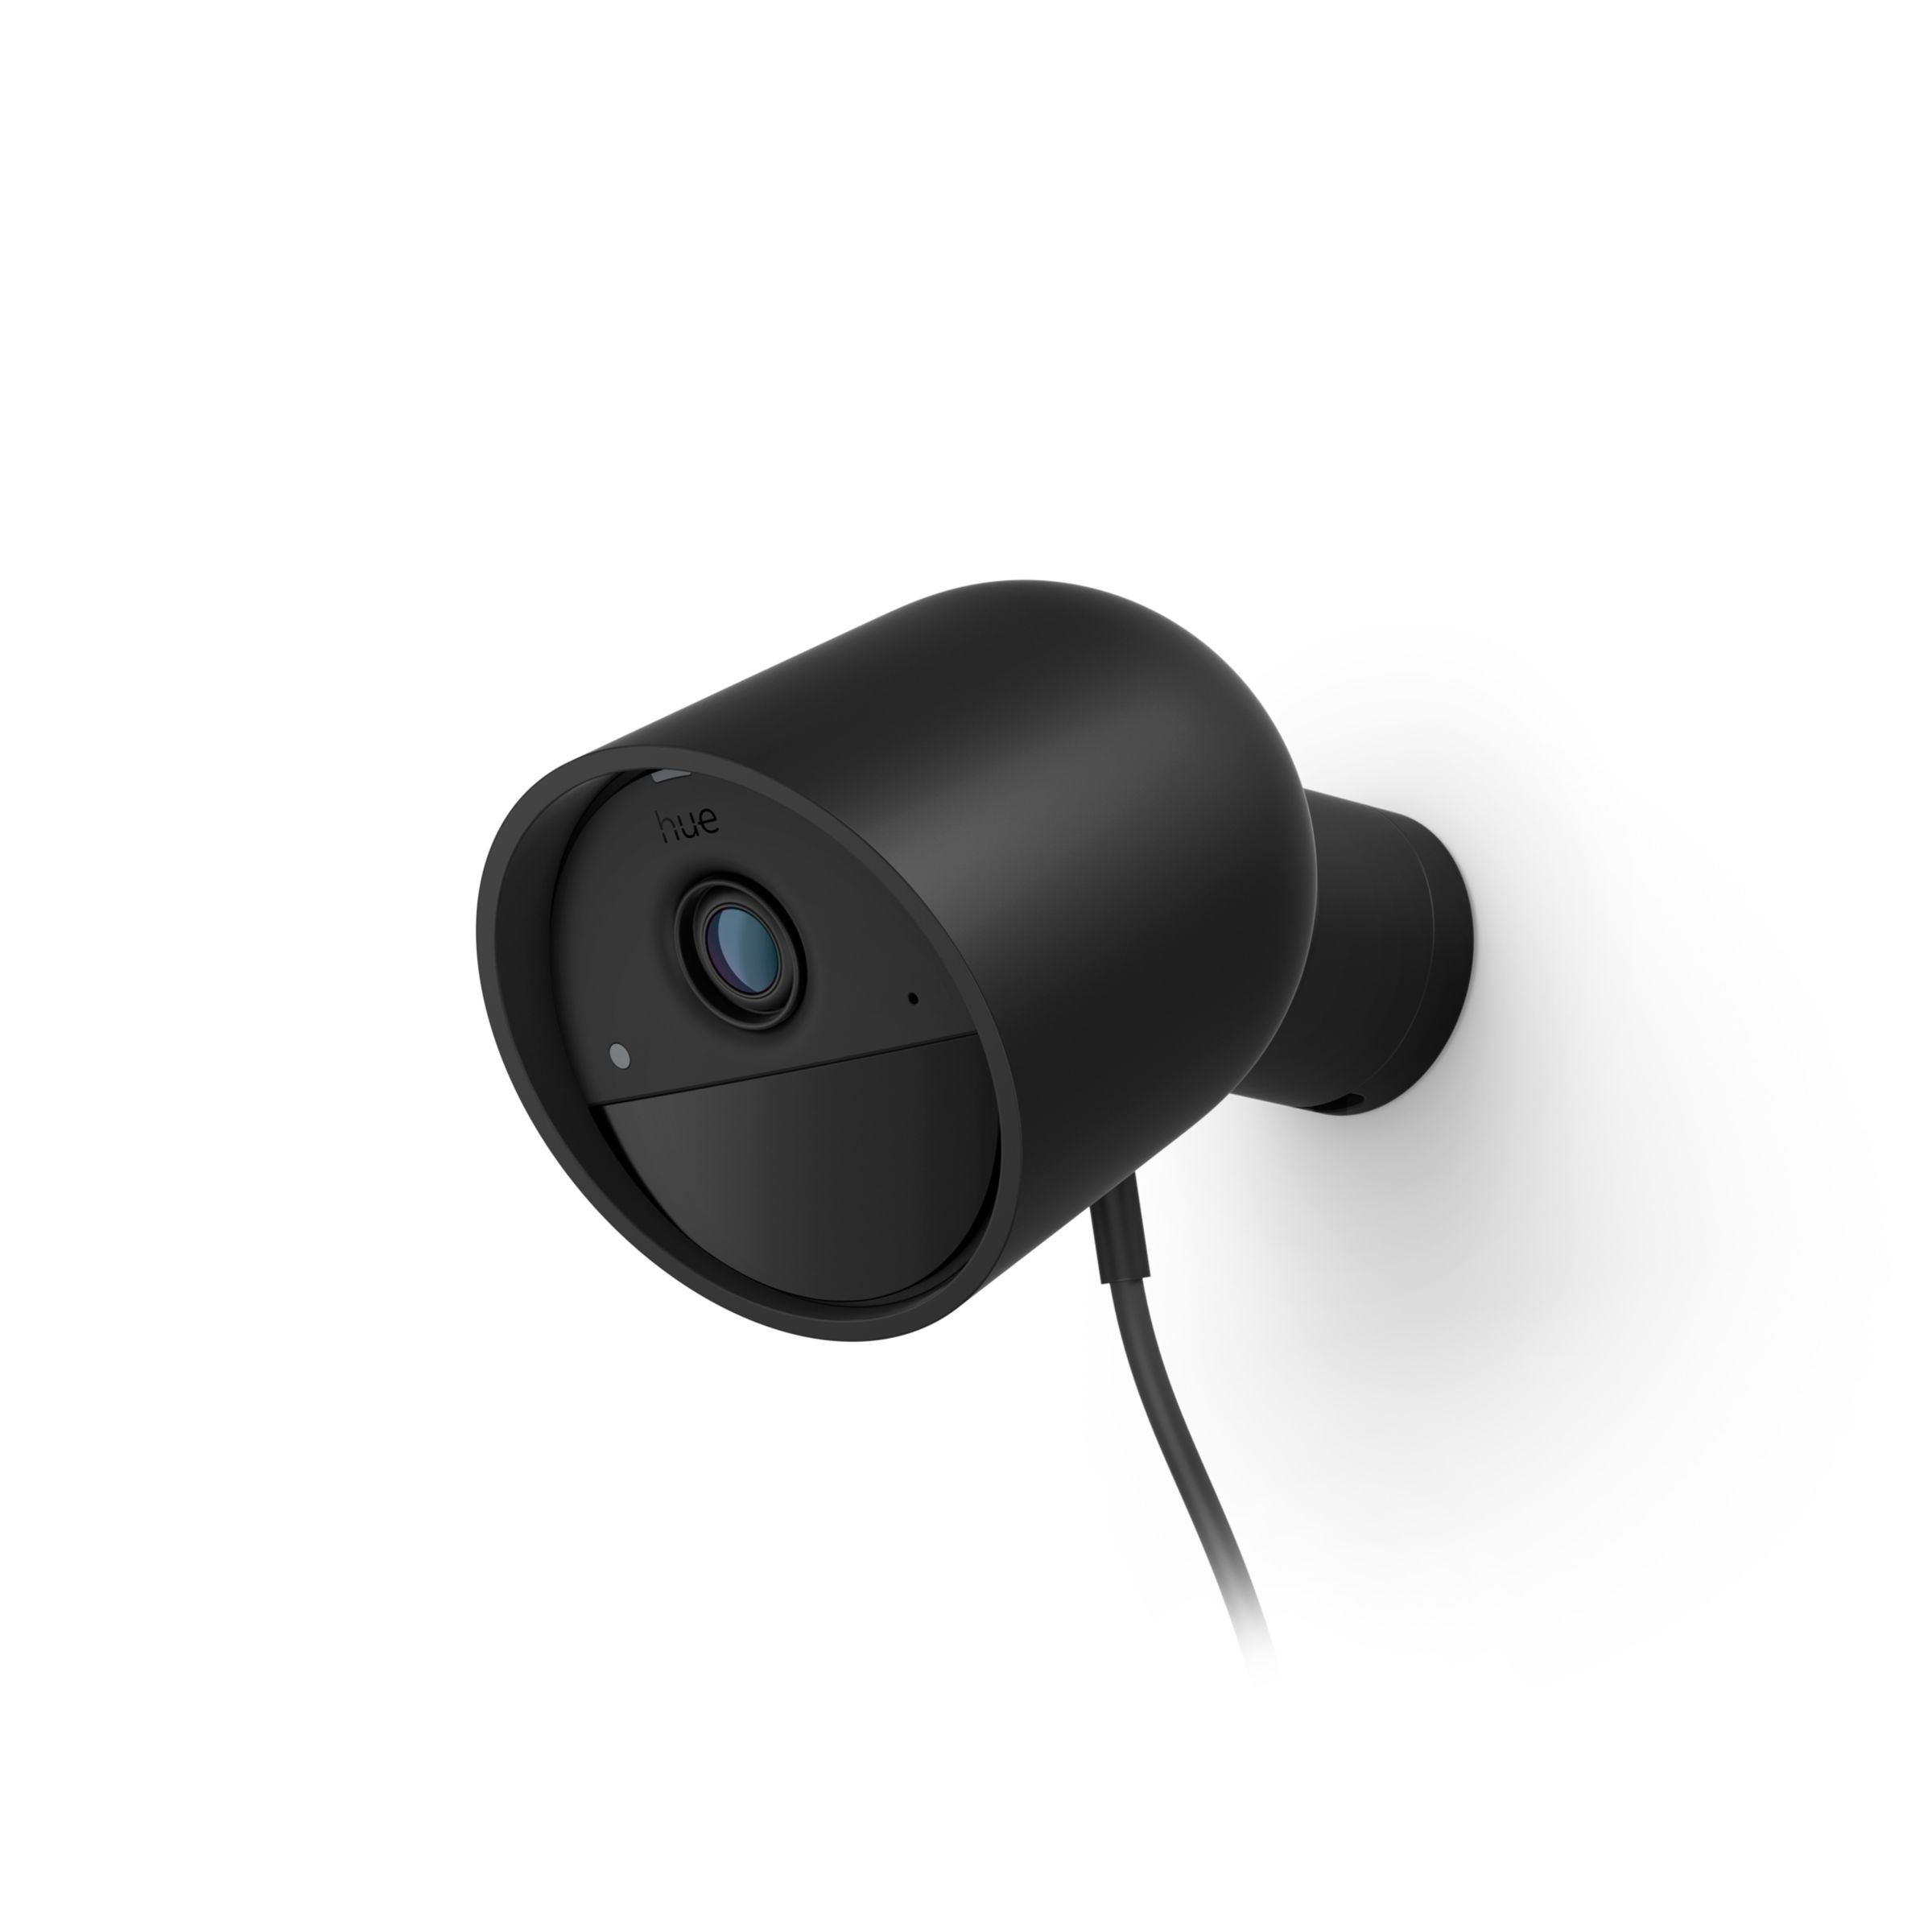 Hue Secure wired camera | Philips Hue US